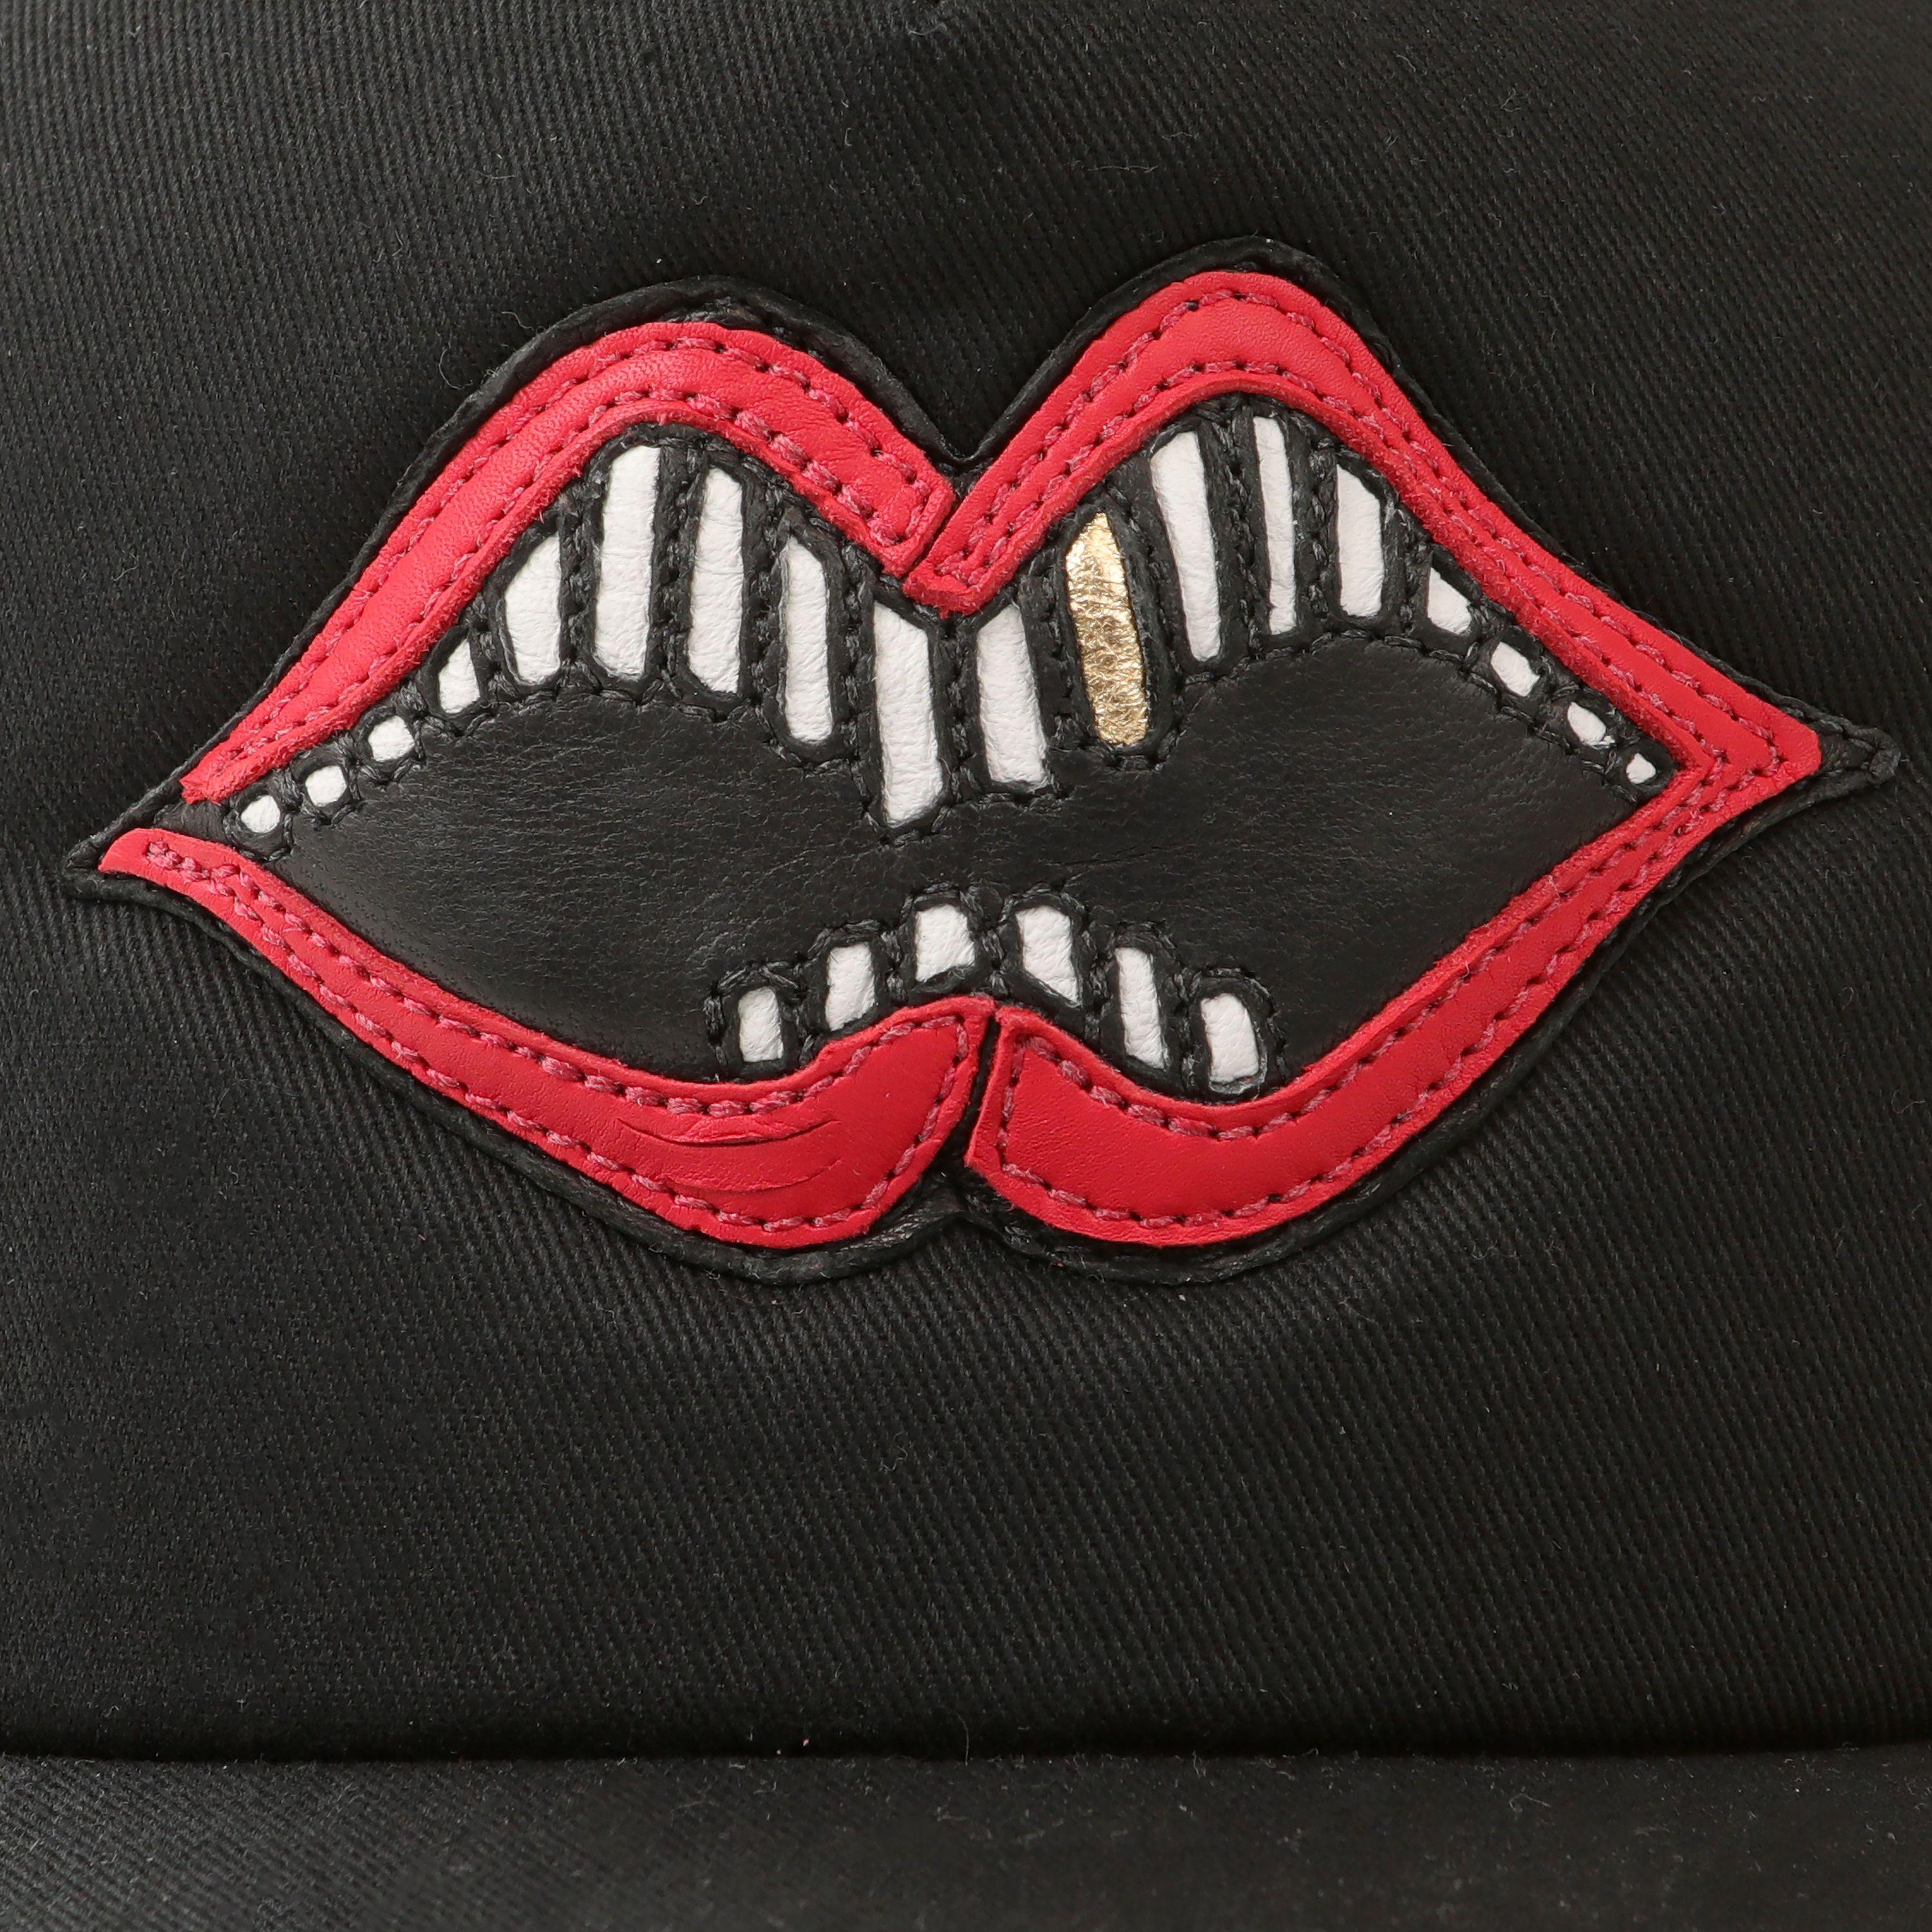 This authentic Chrome Hearts Black Gold Grill Canvas Hat is in pristine unworn condition.  Edgy black canvas trucker style hat with red lipped mouth and gold tooth grill. 

PBF 14048